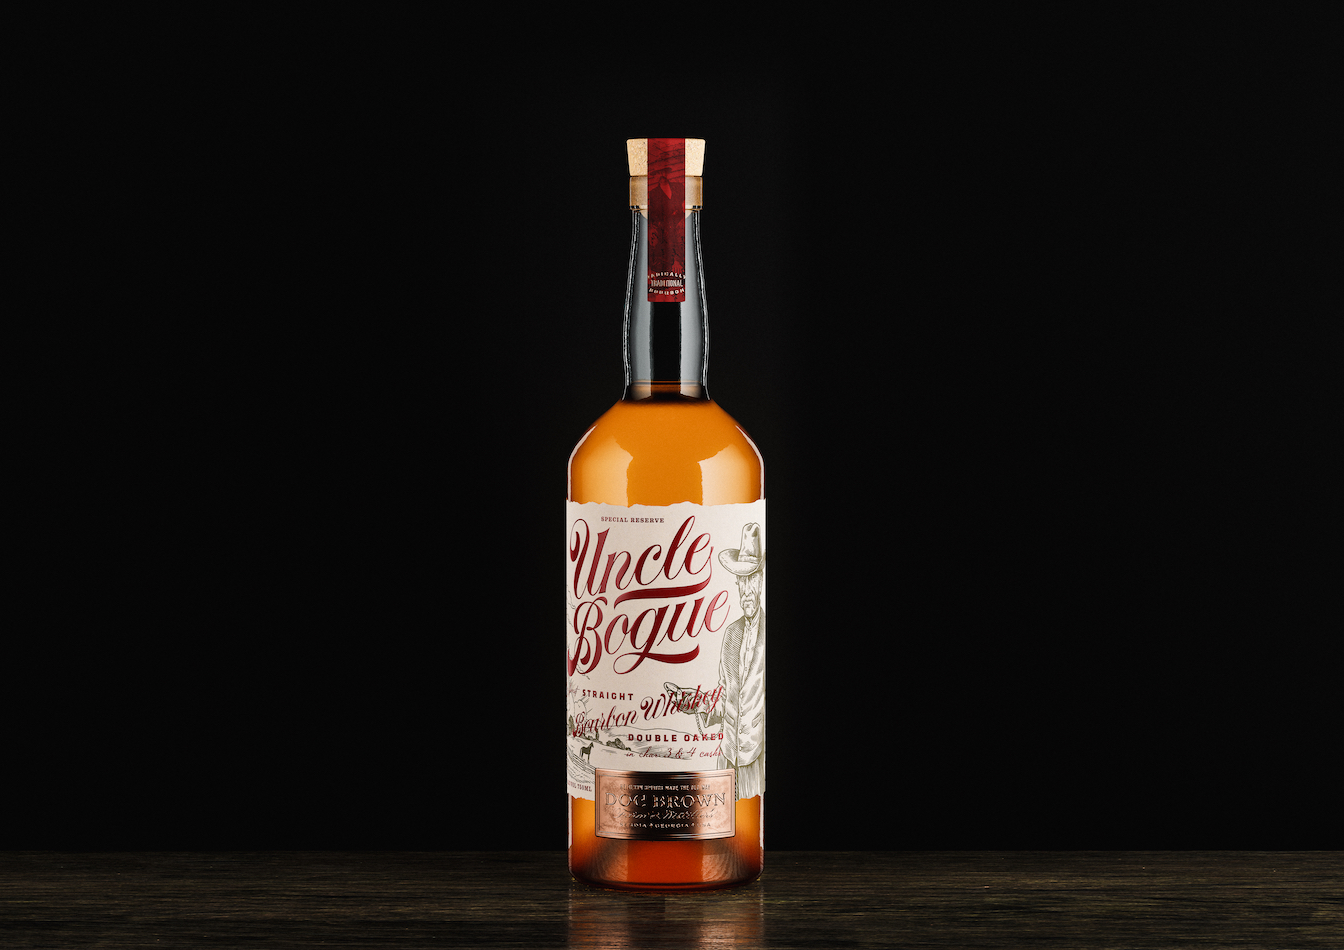 Bottle of Uncle Bogue four-year-old Georgia bourbon by Doc Brown Farm & Distillers